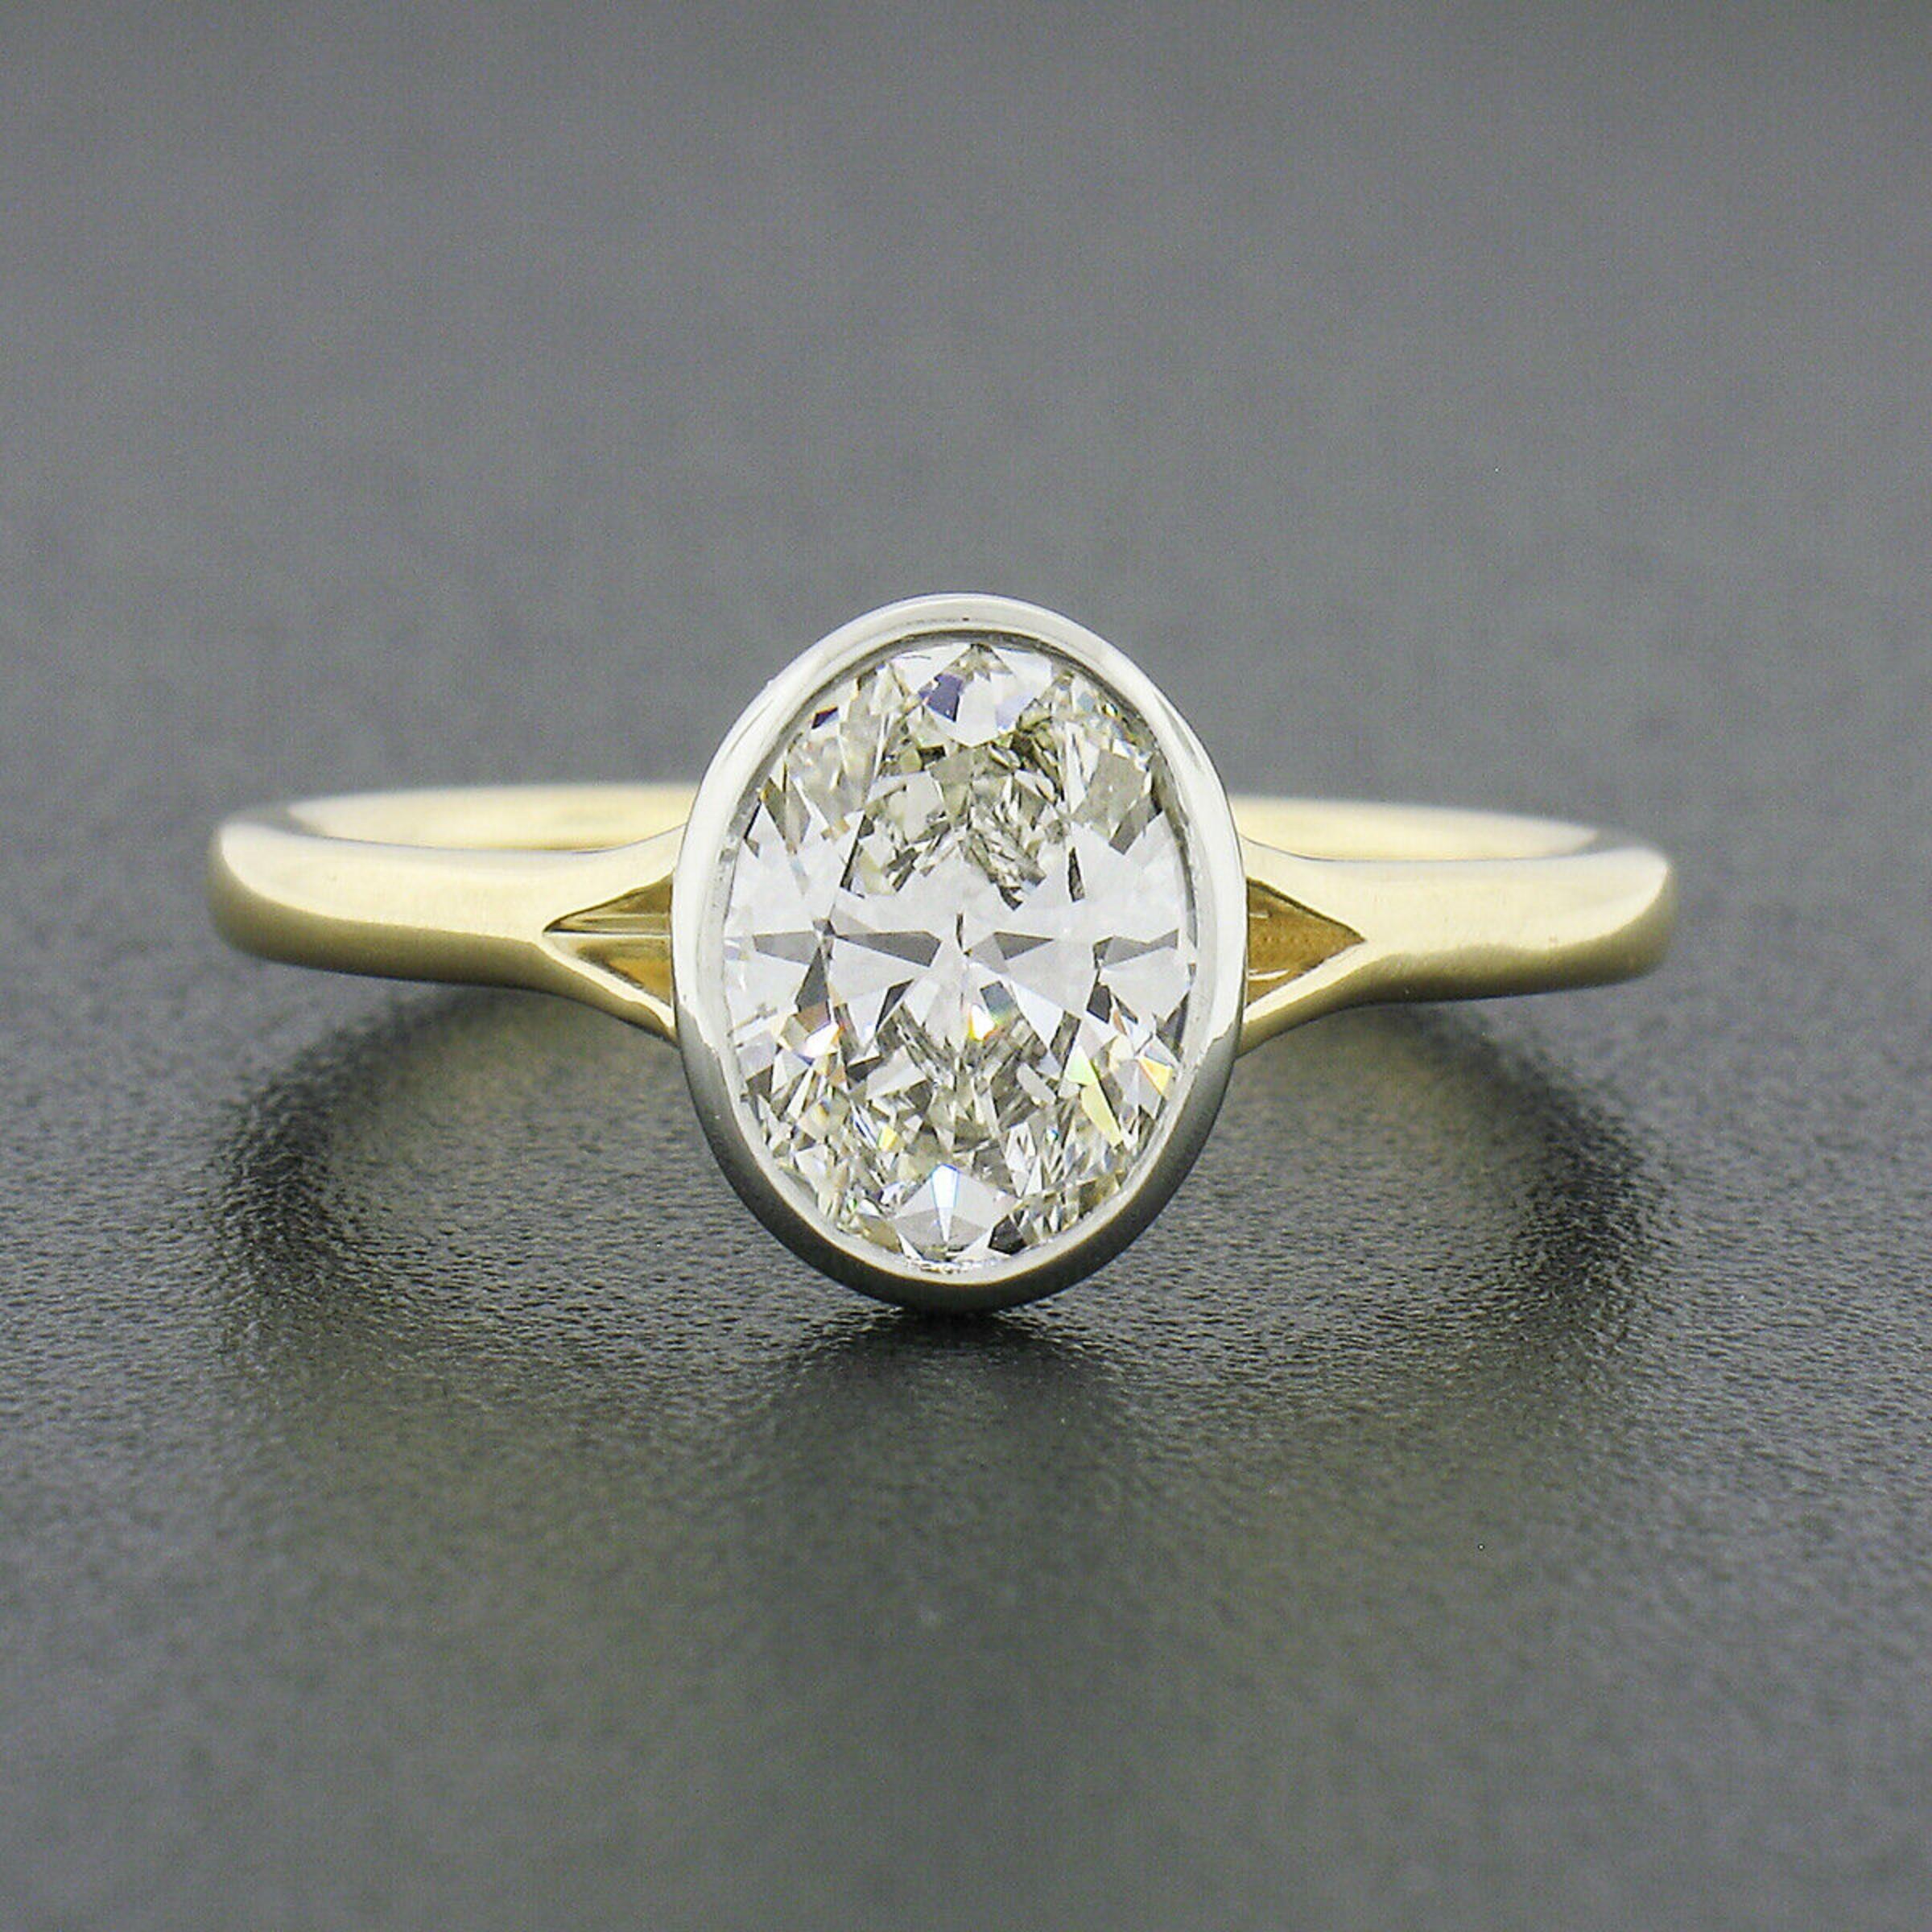 Here we have an absolutely gorgeous diamond solitaire engagement ring newly crafted from solid 18k yellow and white gold. The diamond is GIA certified and shows a large and attractive size, weighing exactly 1.20 carats in weight. The oval brilliant